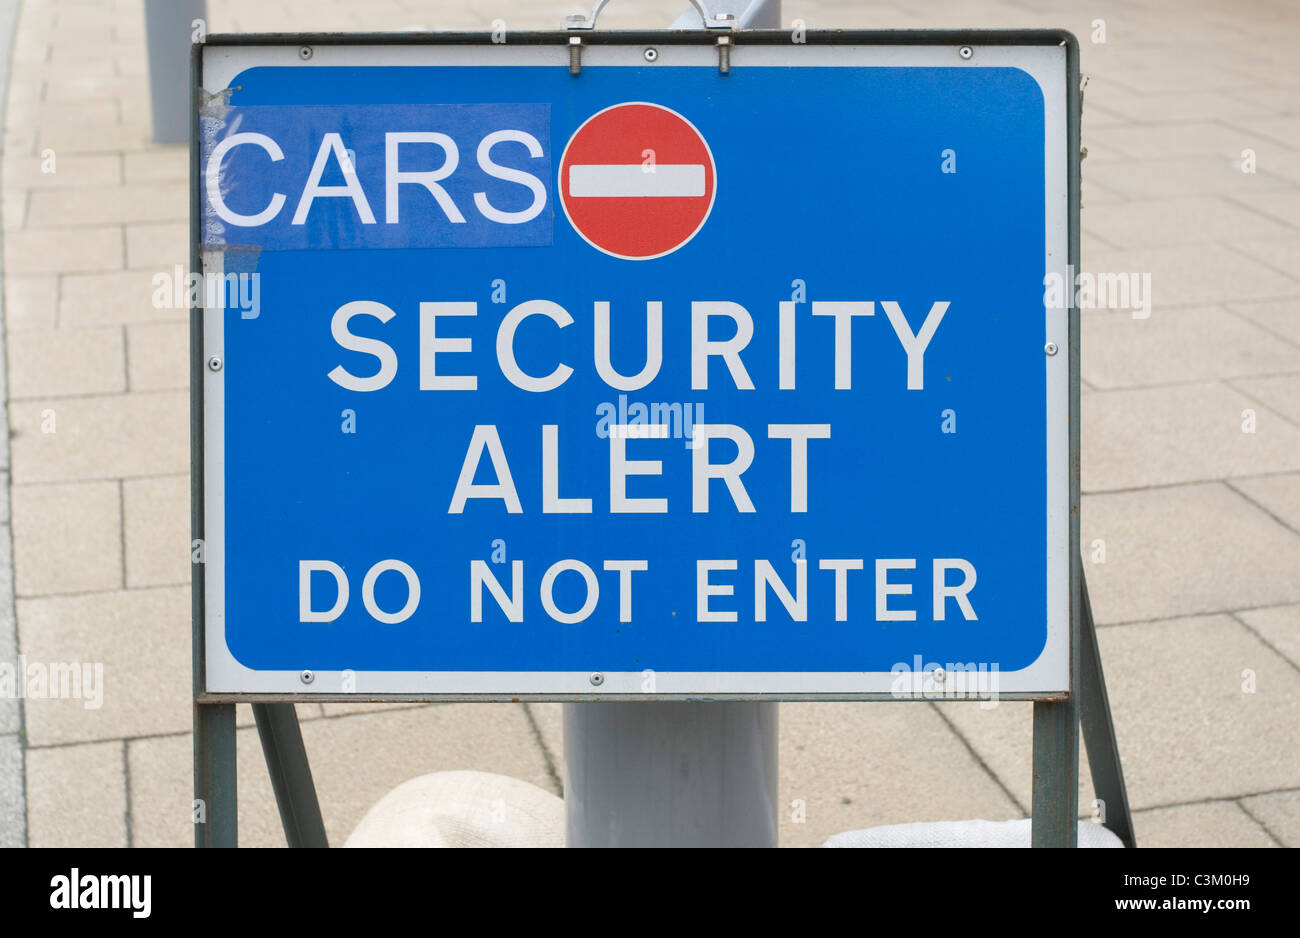 Cars security. Do not enter sign Stock Photo